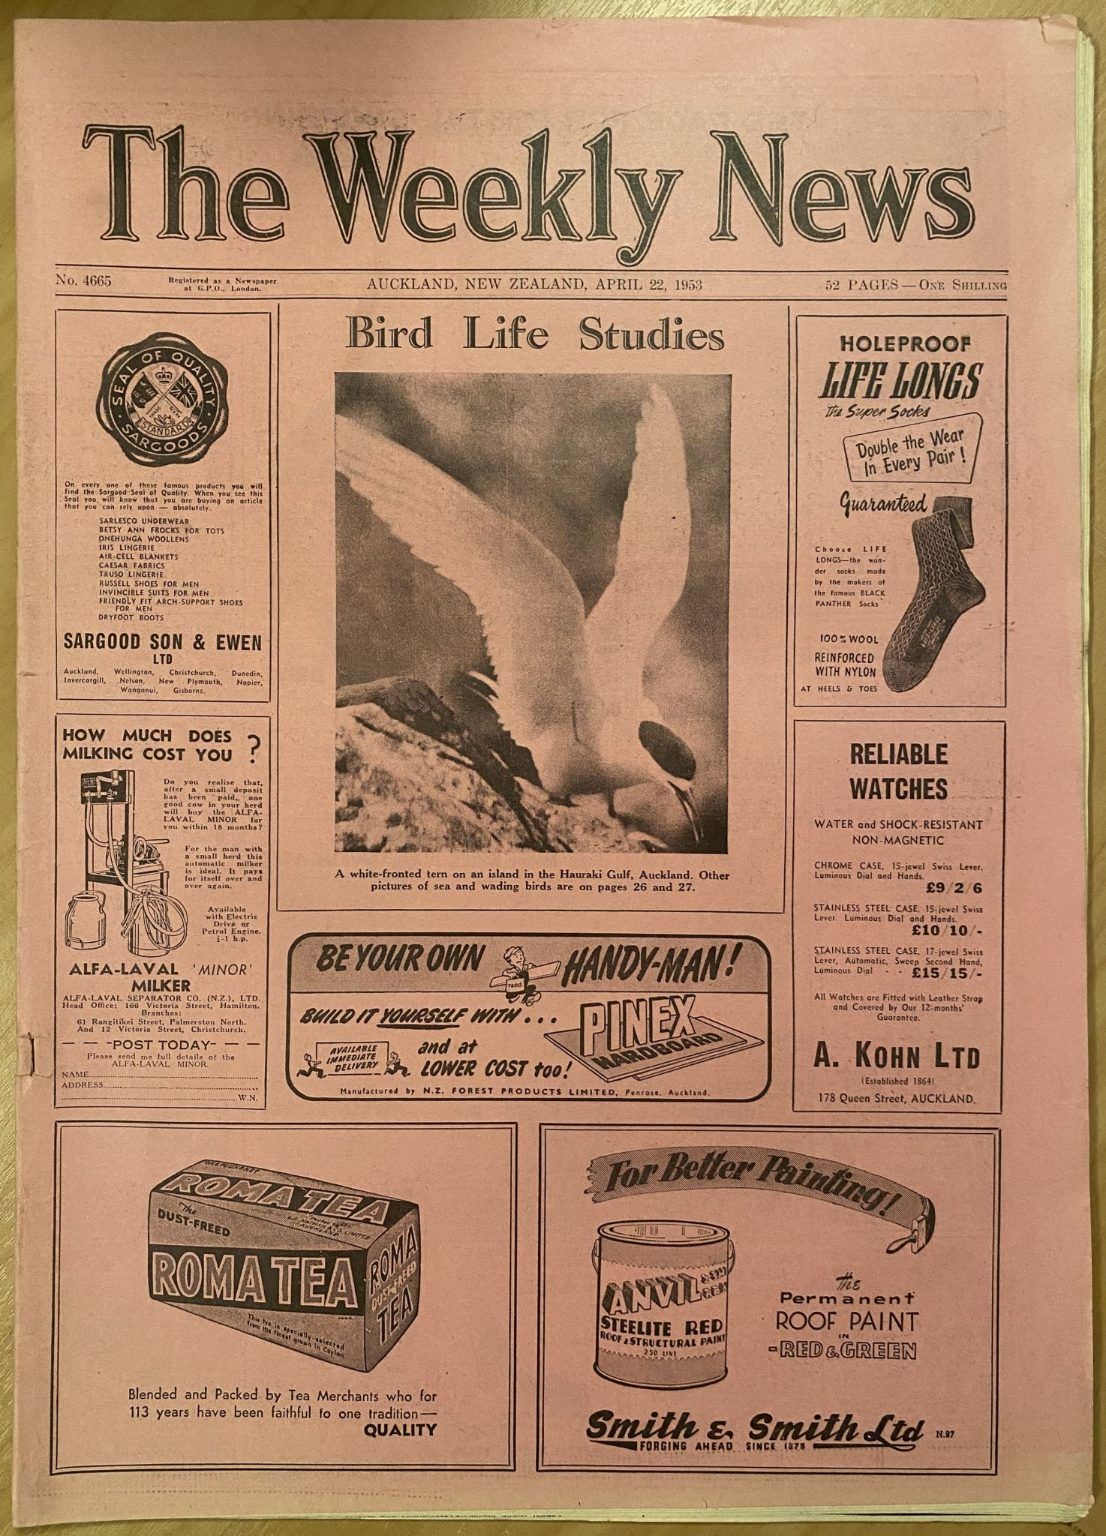 OLD NEWSPAPER: The Weekly News - No. 4665, 22 April 1953